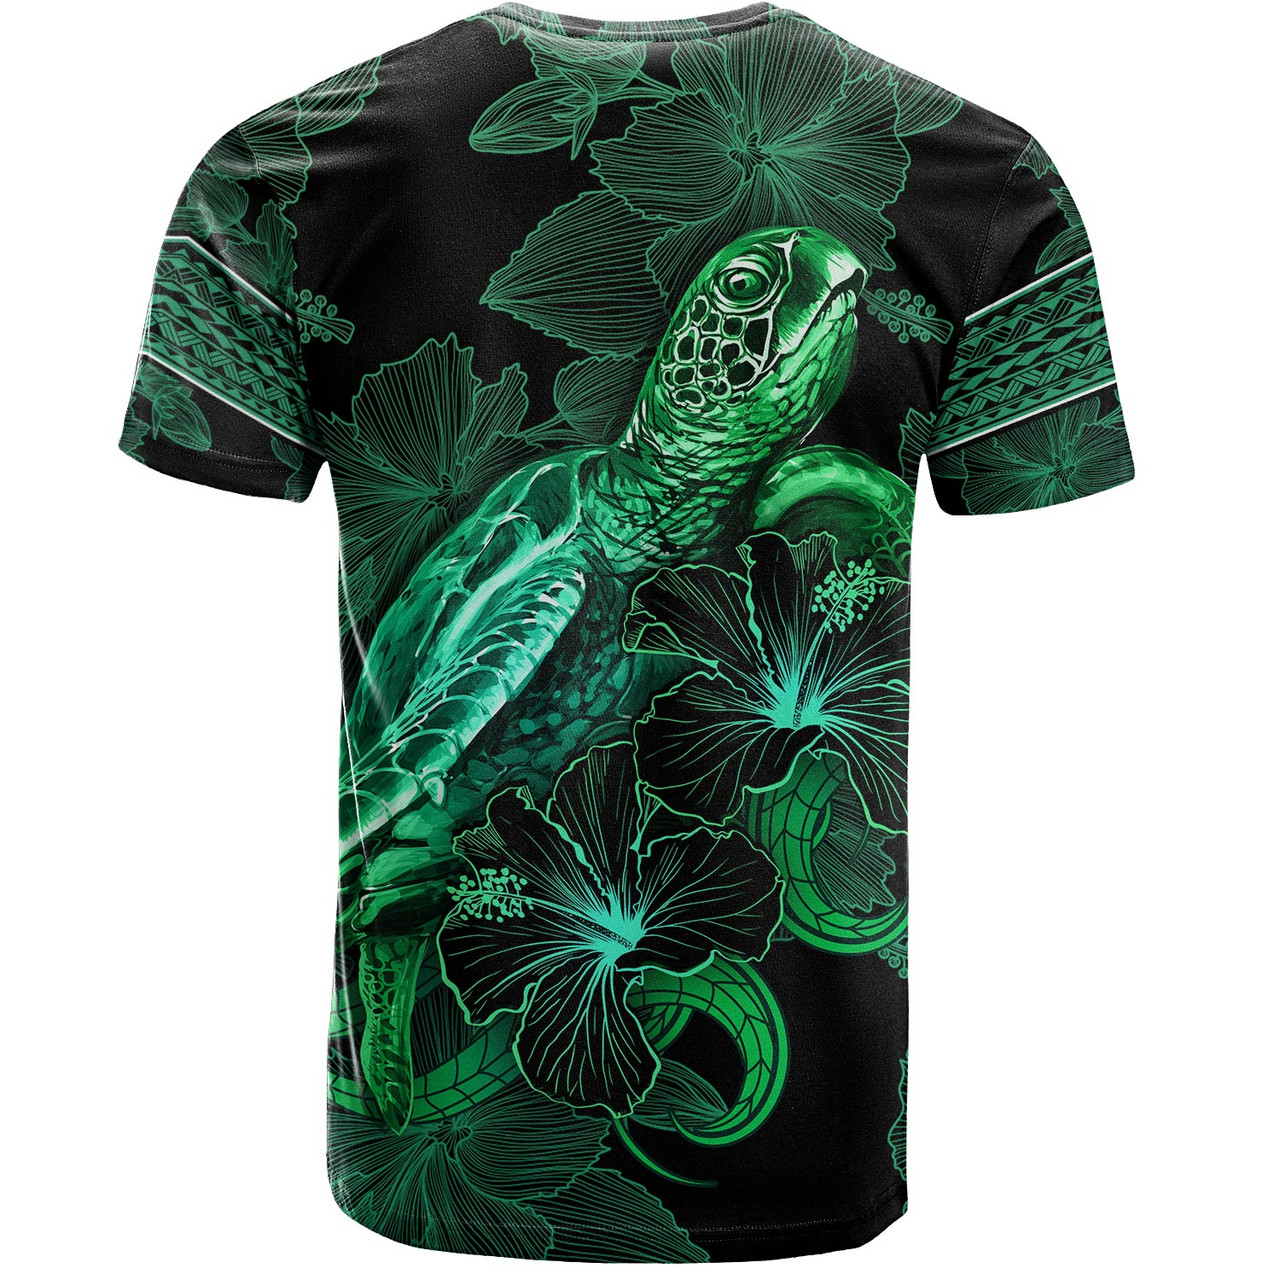 Marquesas Islands T-Shirt  Sea Turtle With Blooming Hibiscus Flowers Tribal Green